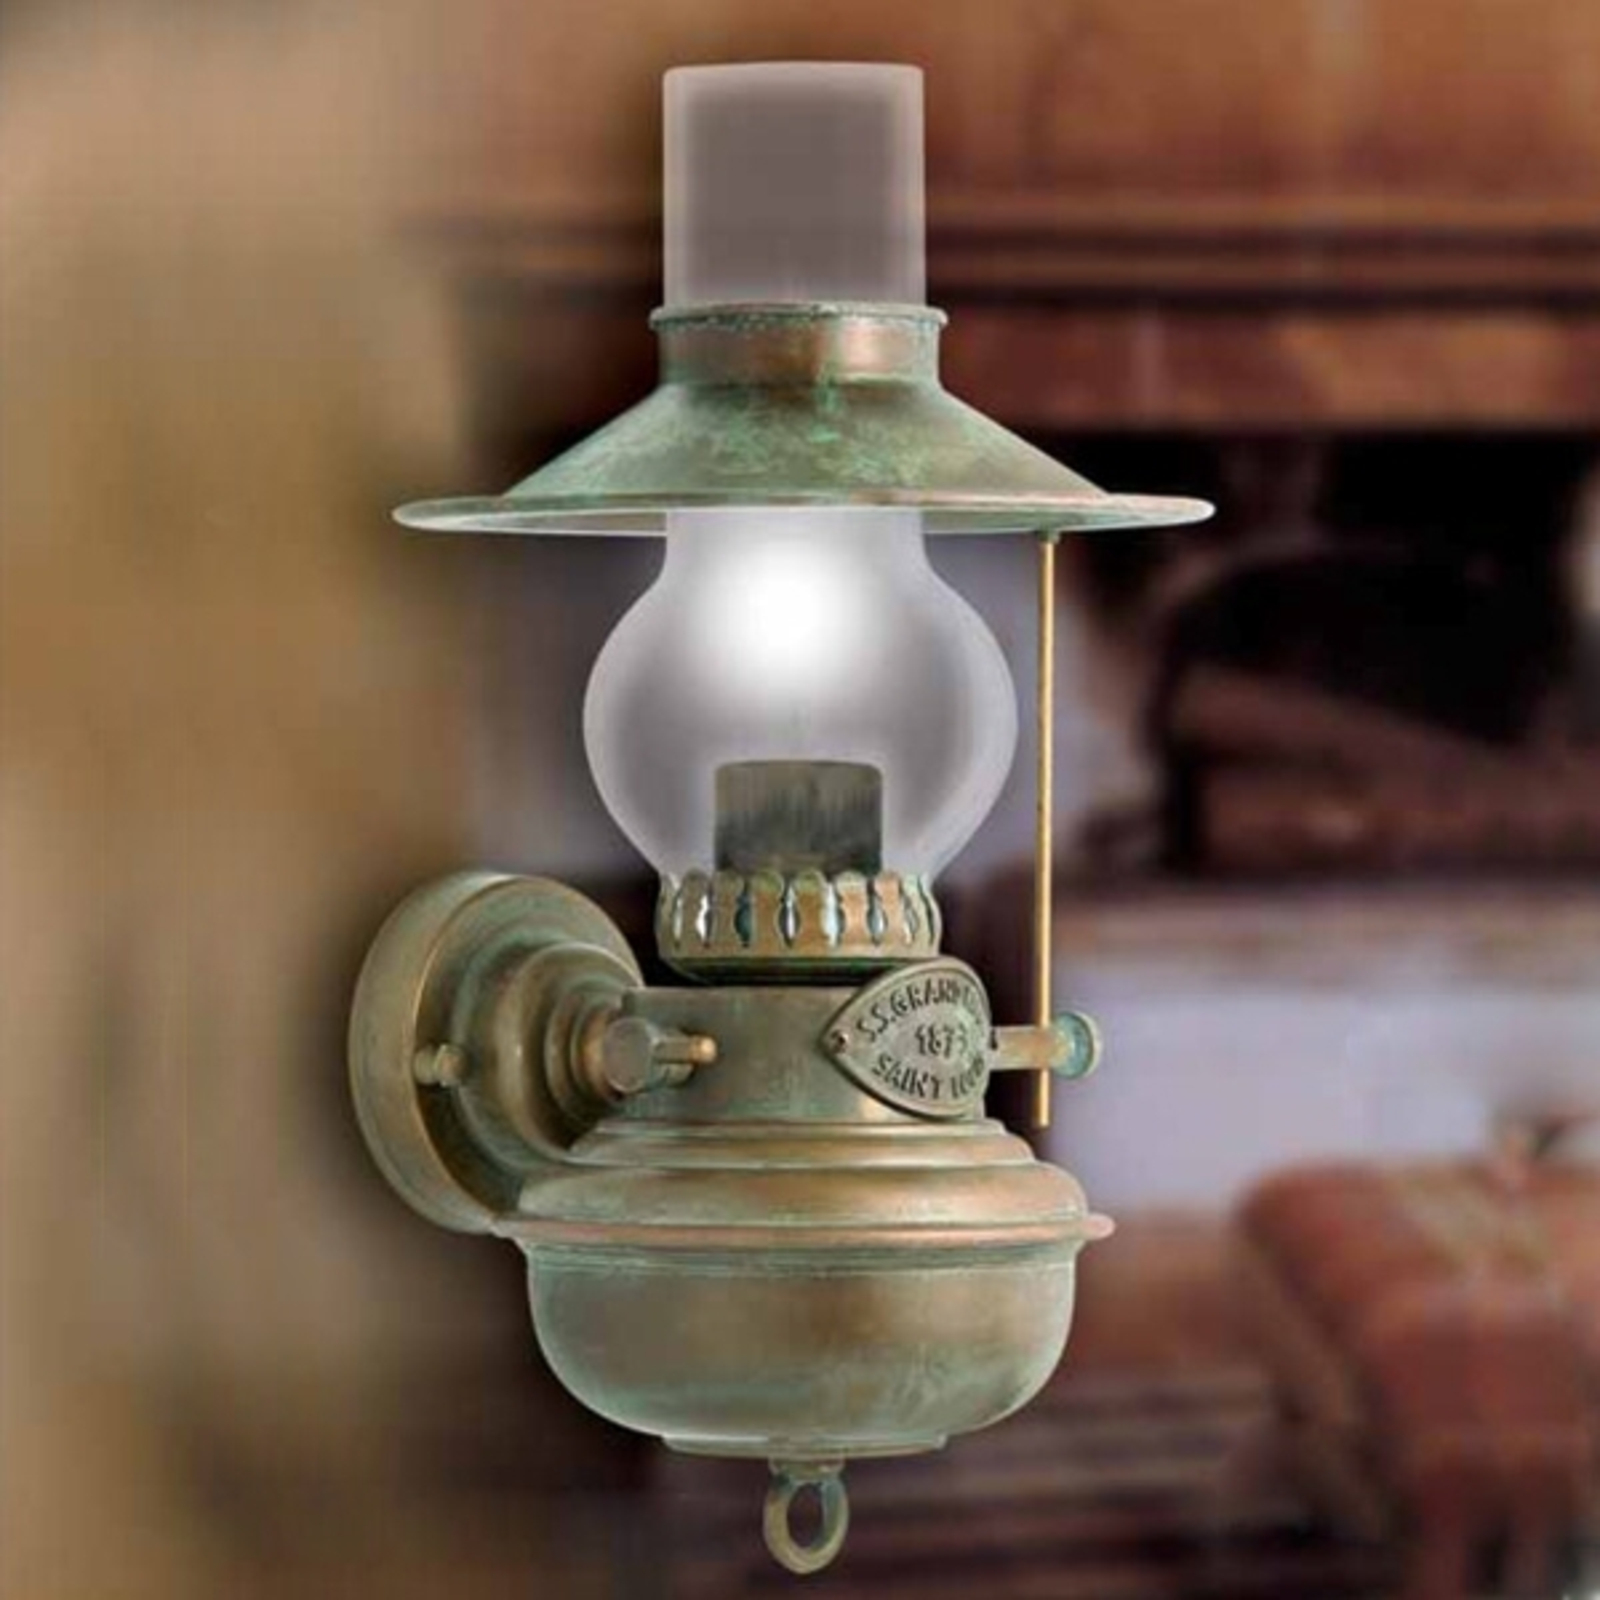 Wall Light Guadalupa In Oil Lamp Look, Wall Mounted Oil Lamps Uk